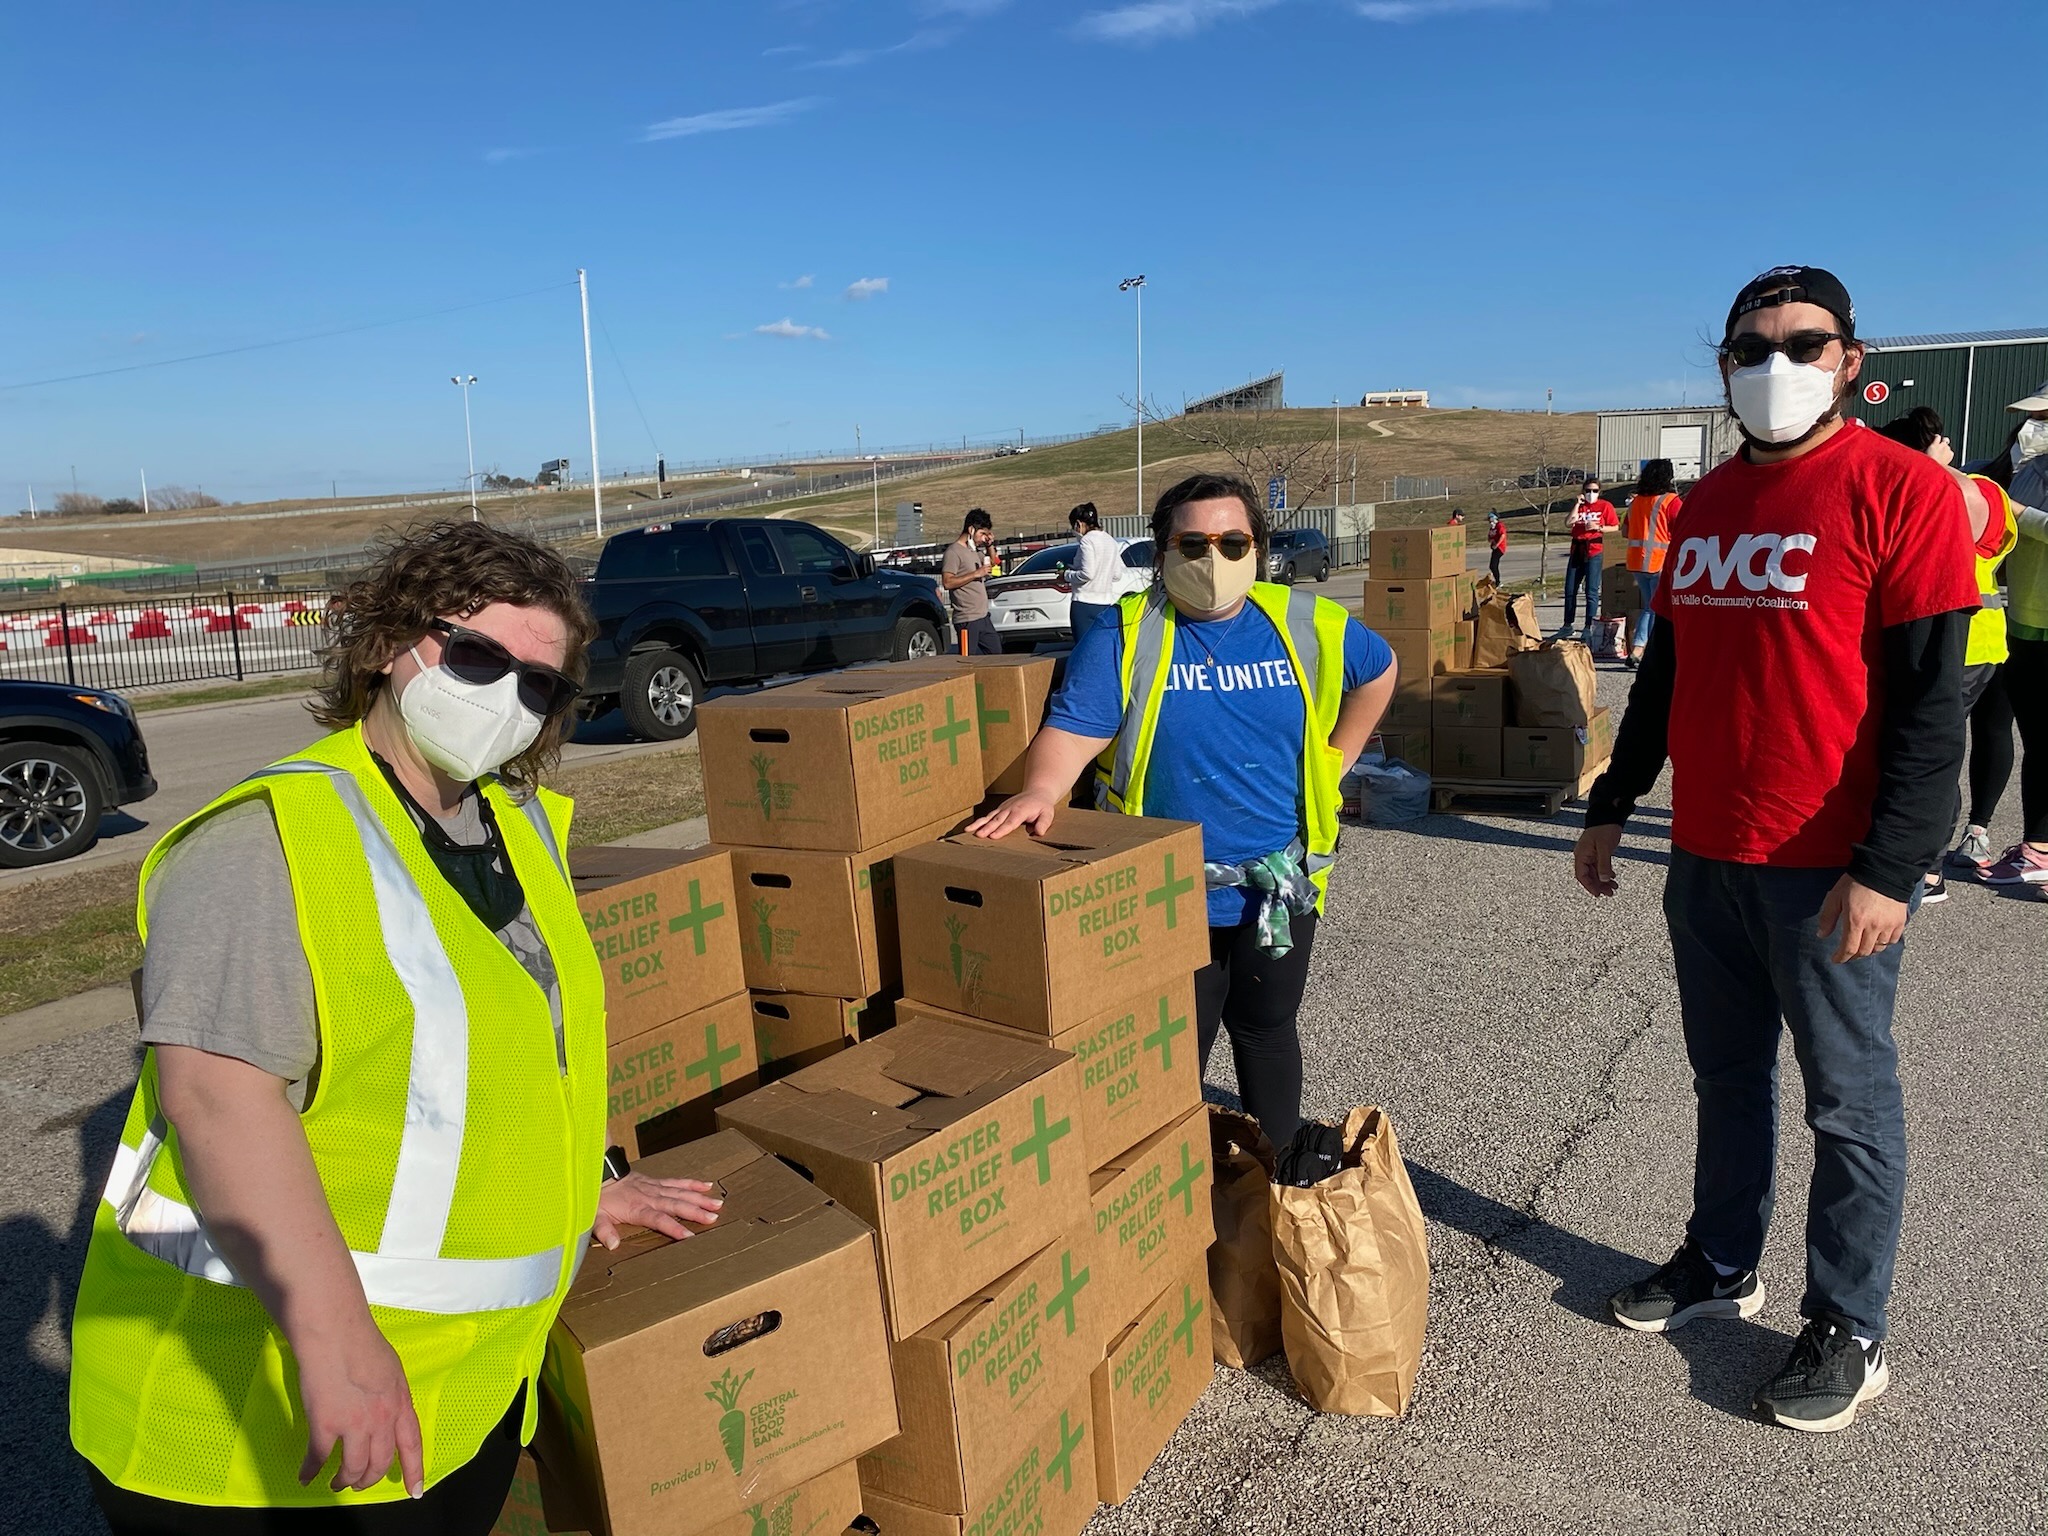 DVCC Winter Storm Uri Relief Event at Circuit of The Americas on February 21, 2021